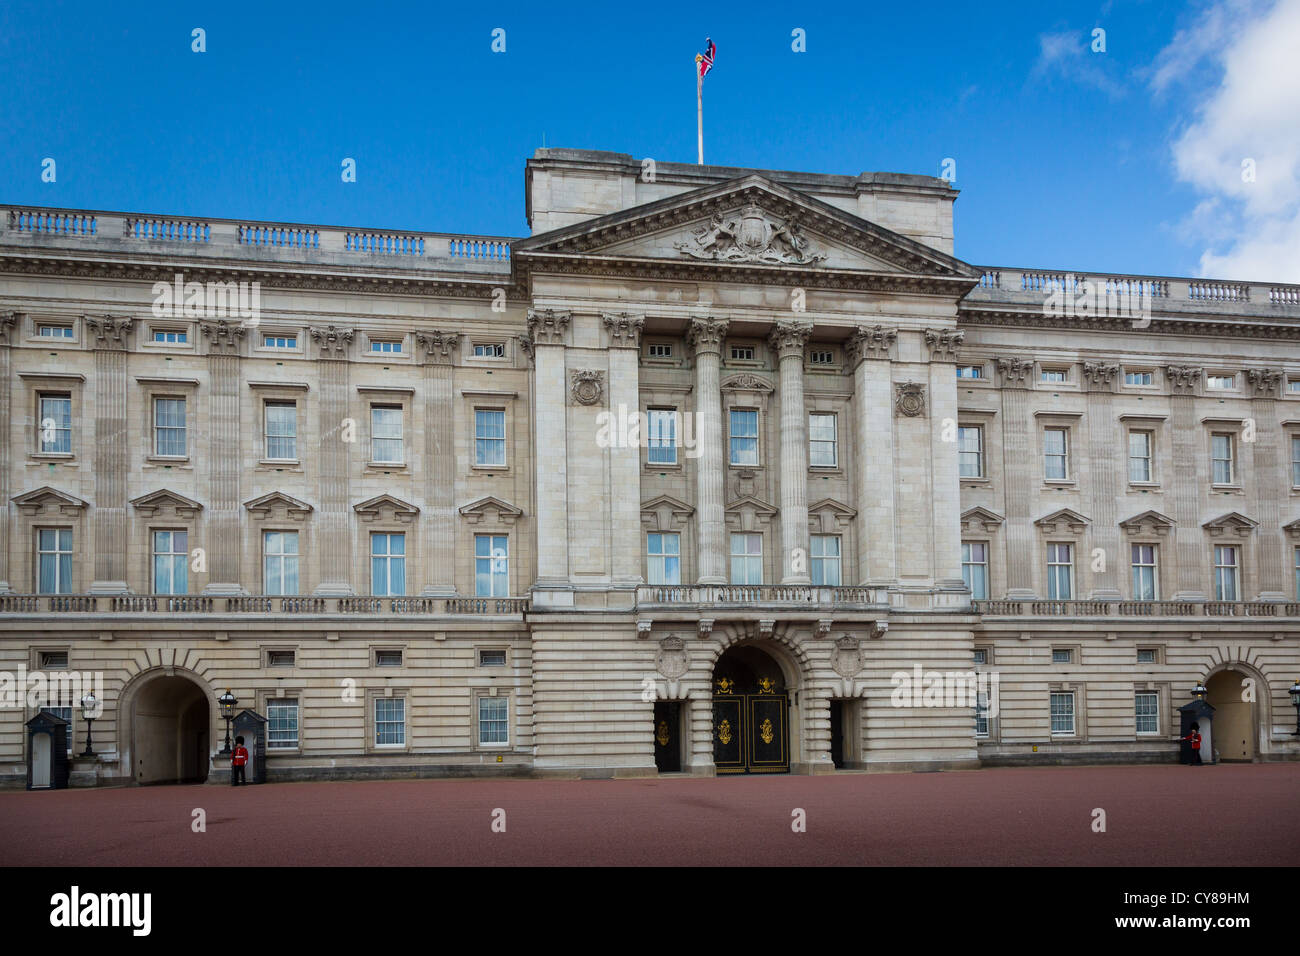 The Changing of the Guards at Buckingham Palace in London Stock Photo